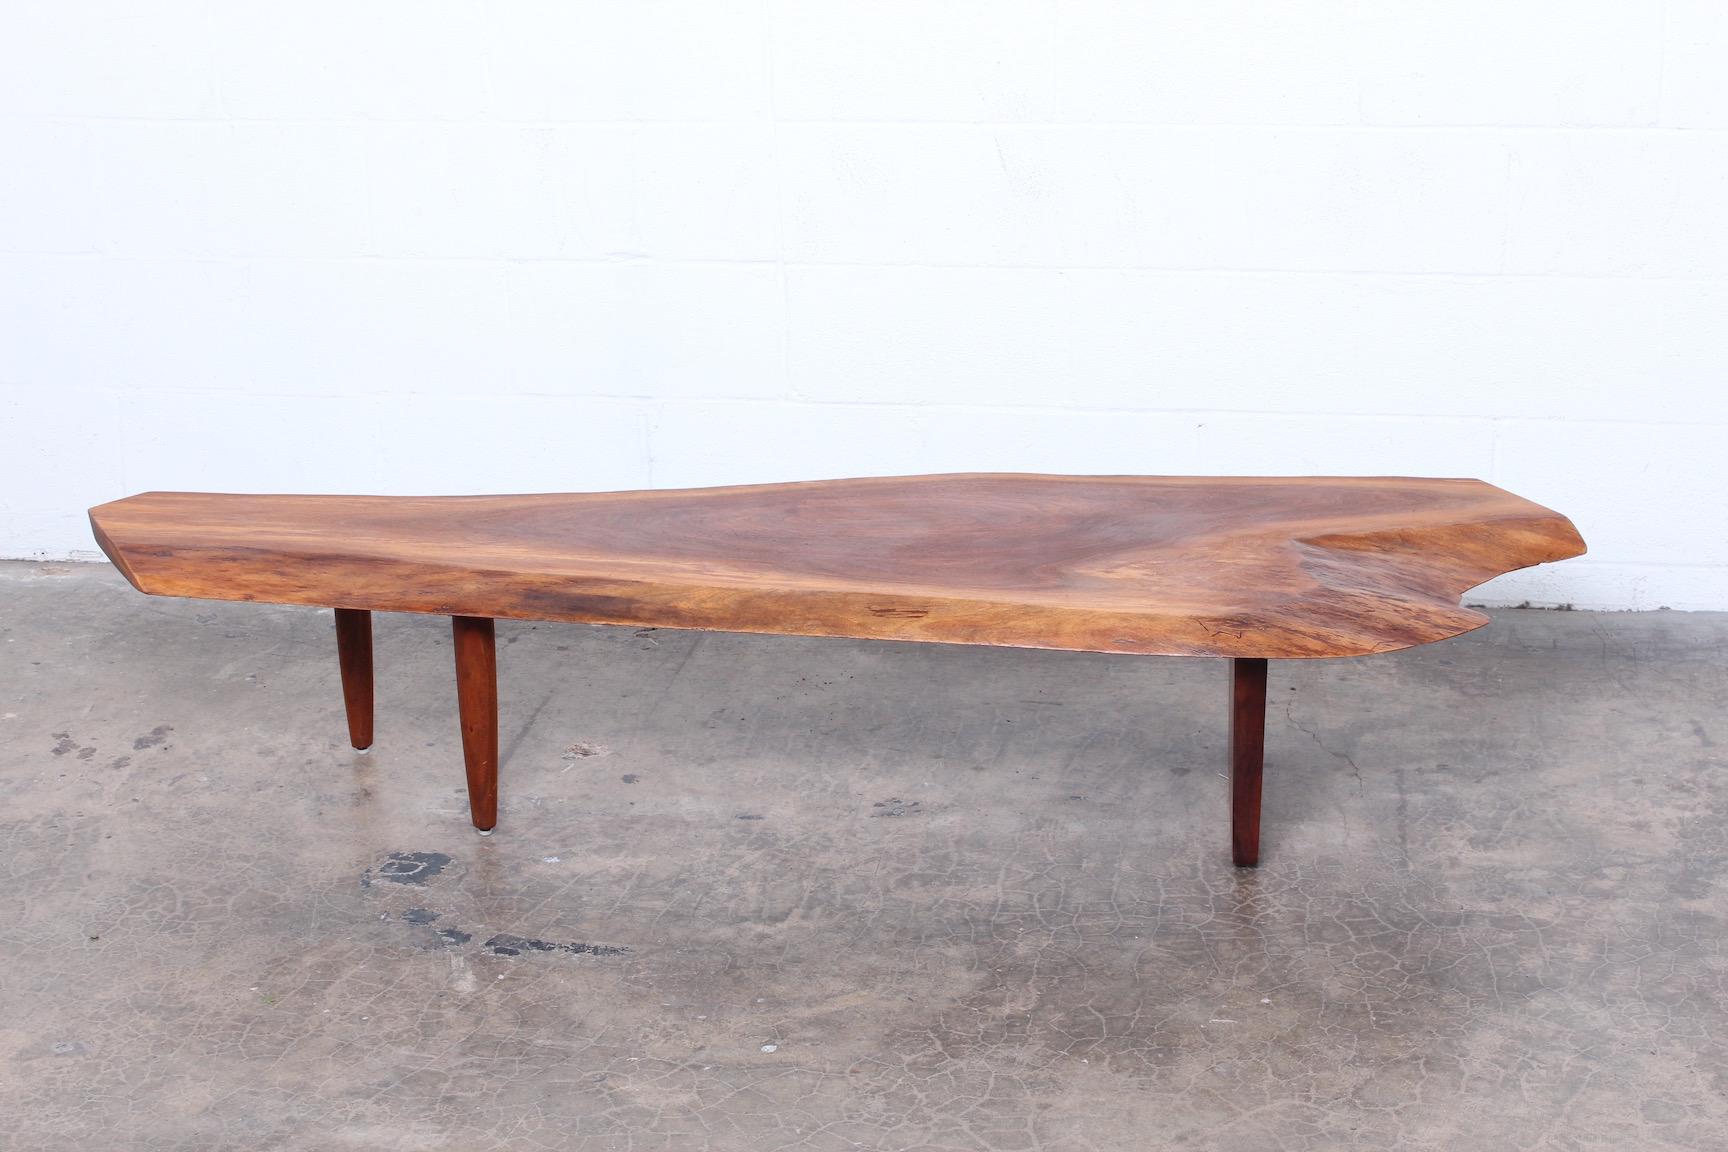 Walnut coffee table or bench by George Nakashima, 1980.